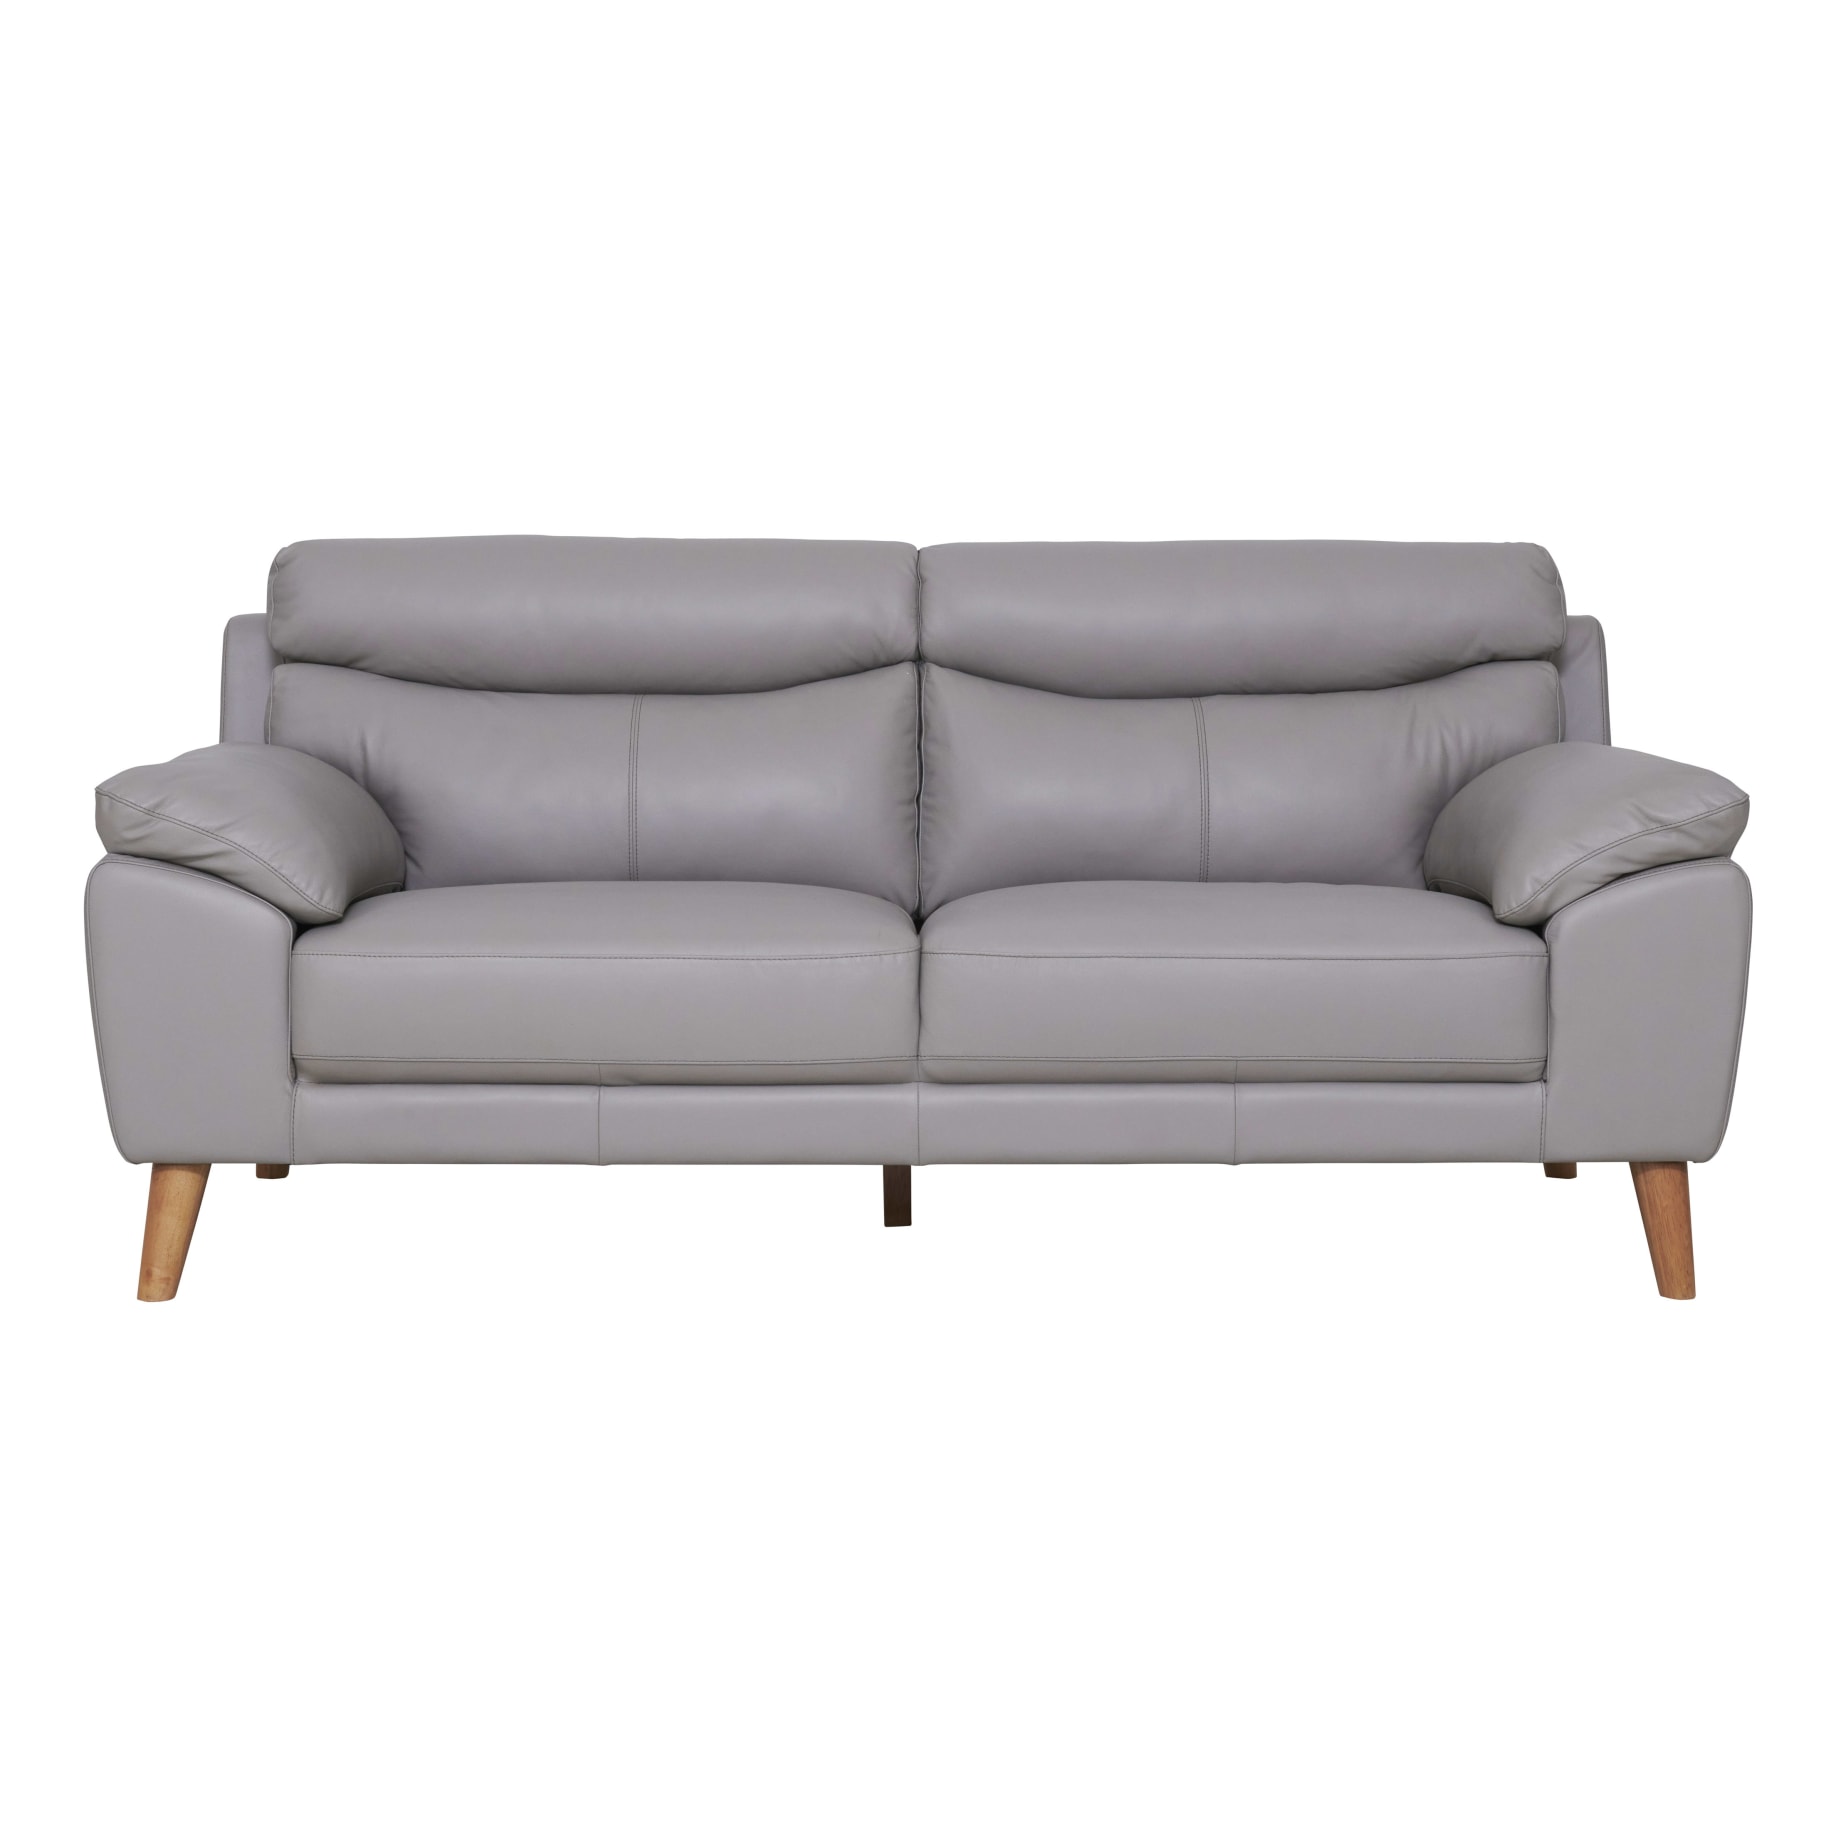 Bronco 3 Seater Sofa in Leather Pewter